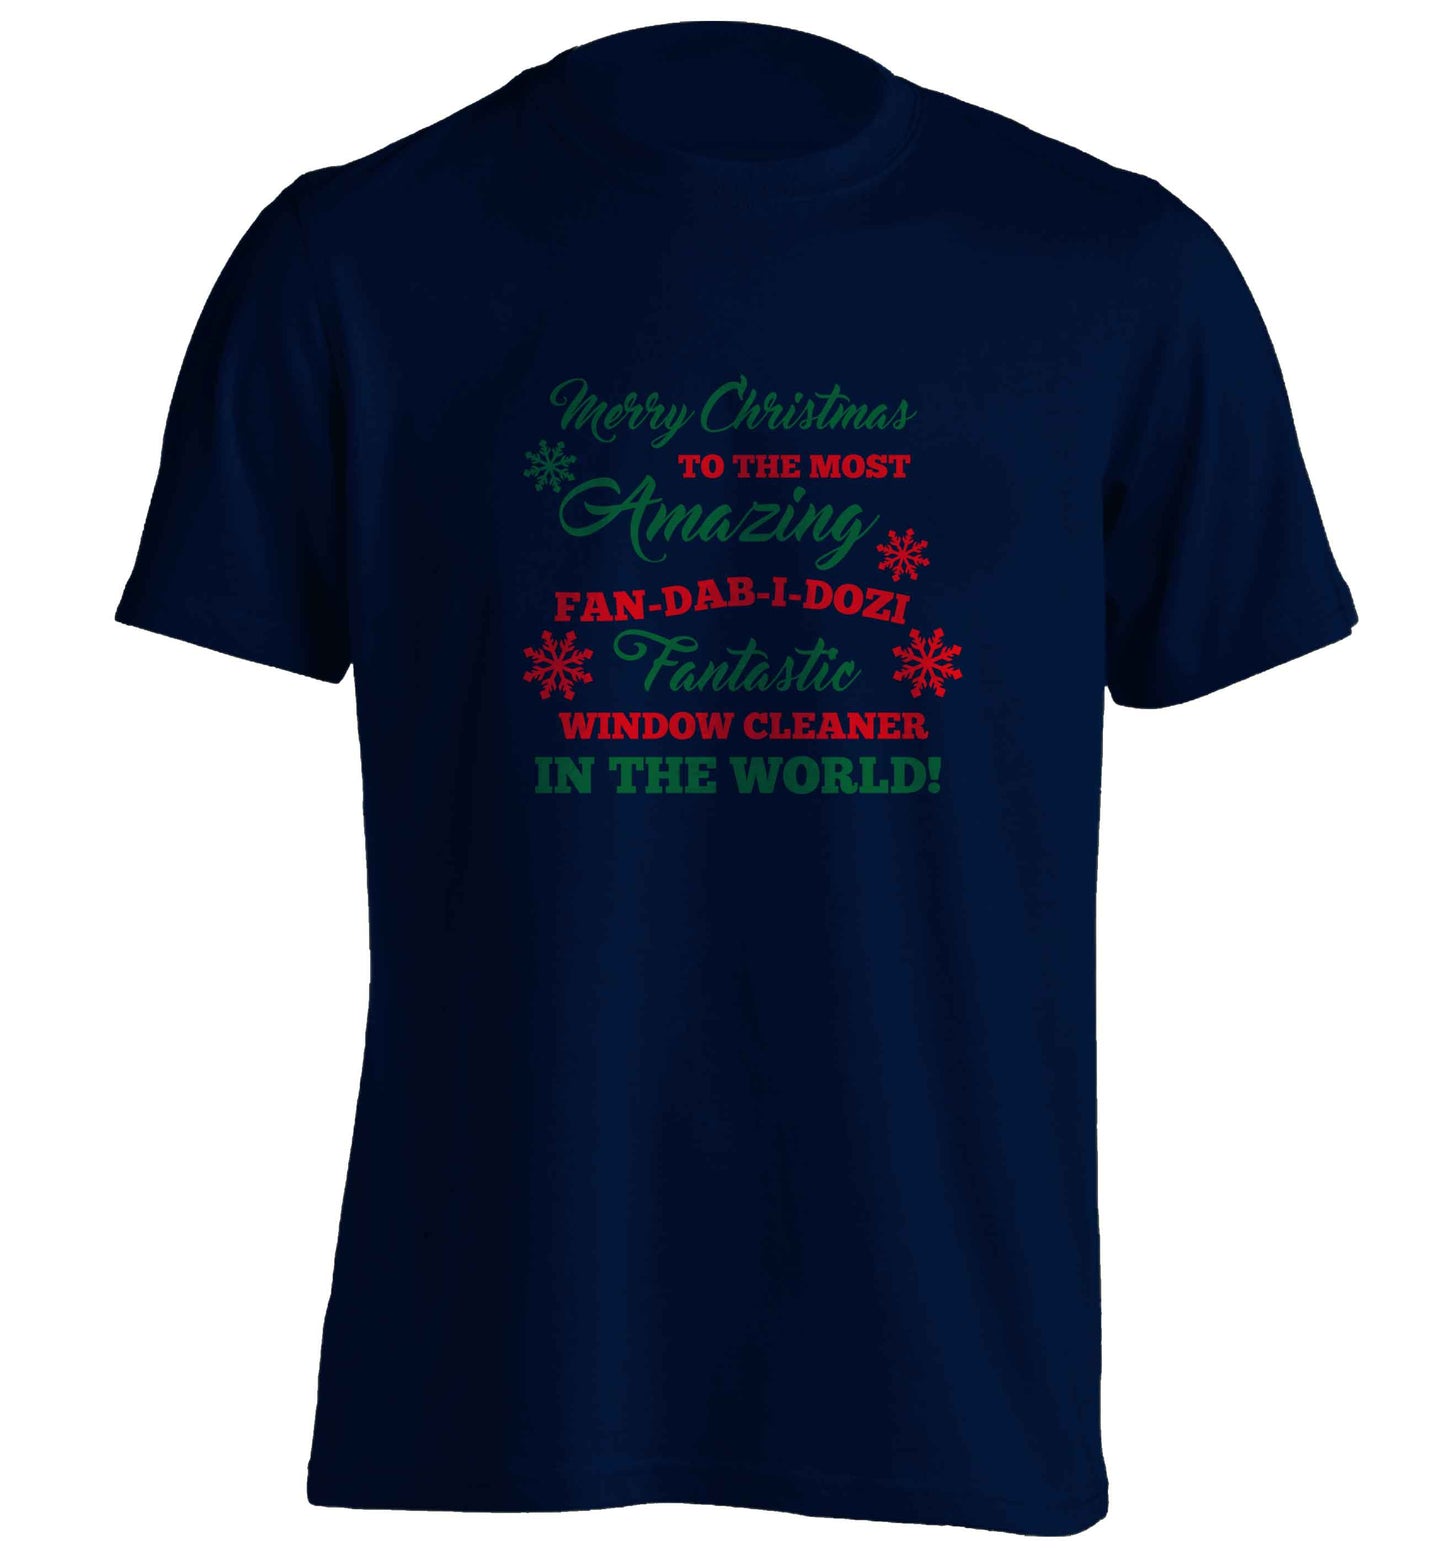 Merry Christmas to the most amazing window cleaner in the world! adults unisex navy Tshirt 2XL